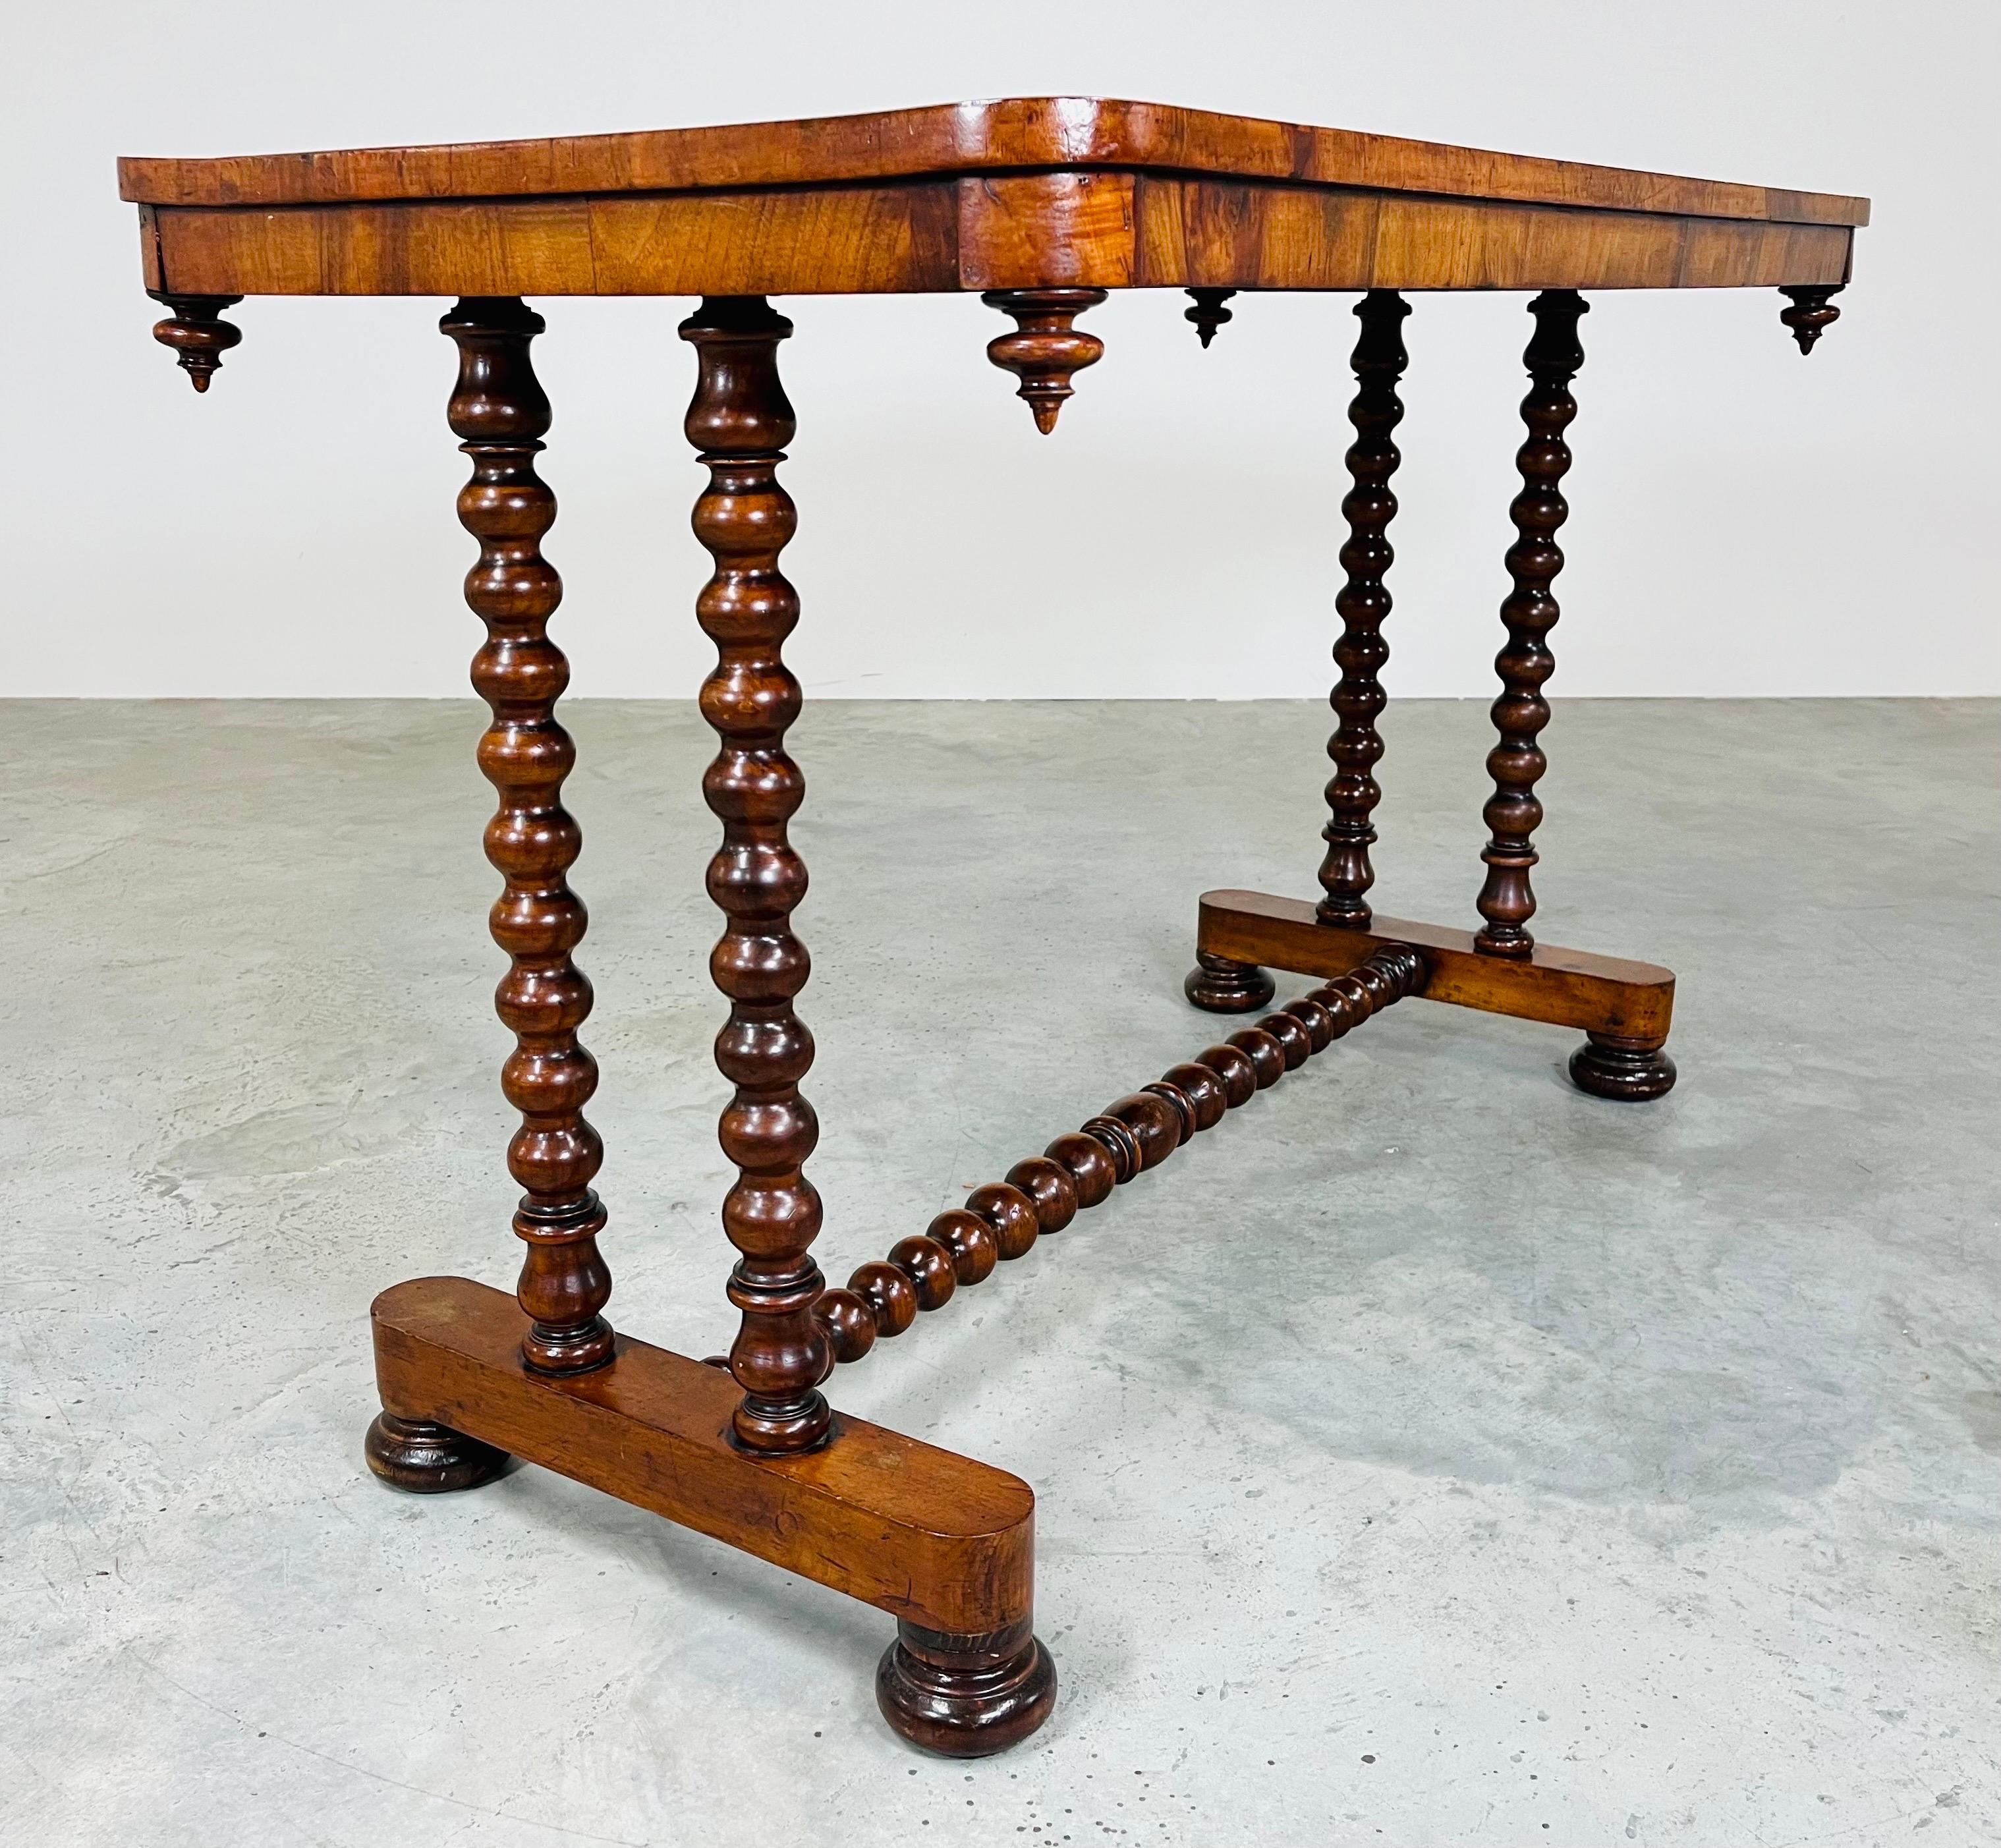 A stunning Mid-19th Century desk or console table having turned mahogany legs and frame with outstanding grain on the top adorned with inverted finials on the aprons corners. 
In fantastic vintage condition having been well maintained and treated